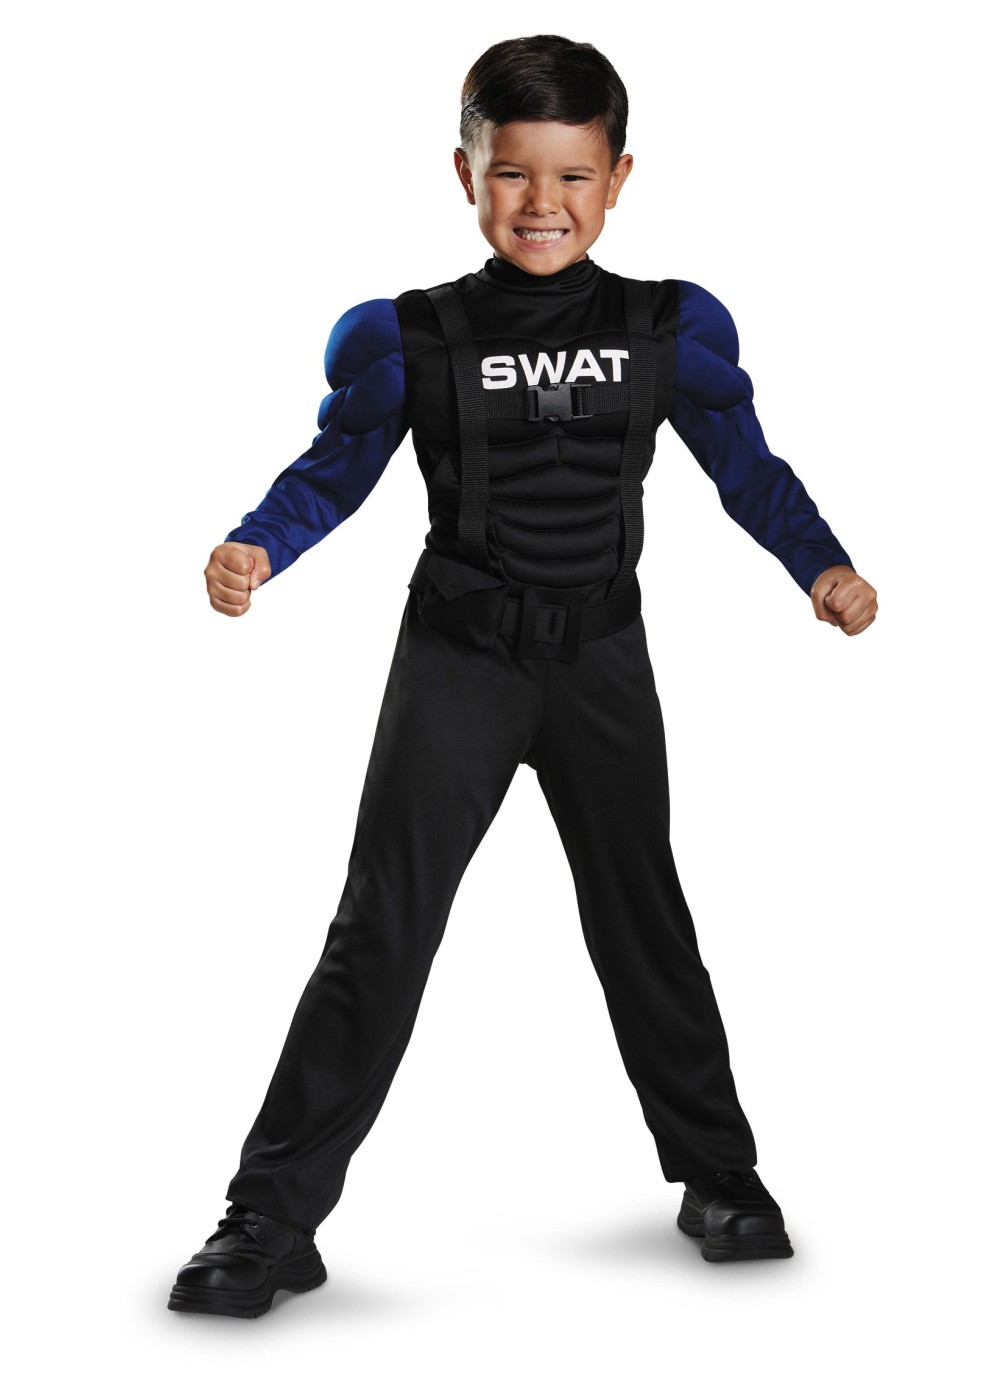 Swat Toddler Muscle Costume